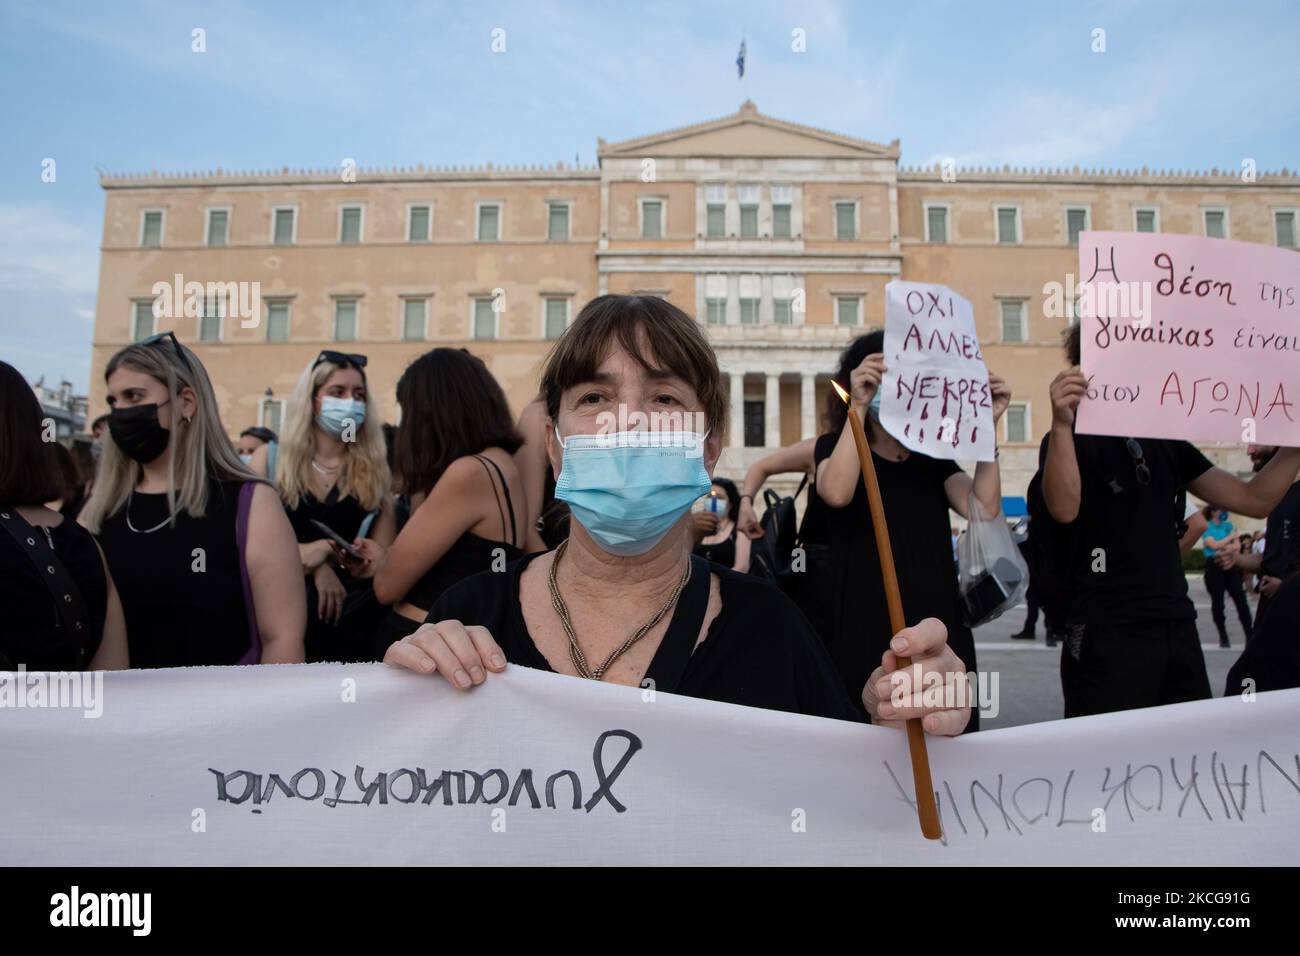 People gathered to protest wearing black clothes and holding candles in honour of Caroline Crouch in Syntagma square, front of the Greek Parliament in Athens, Greece on June 19, 2021. On June 17th Babis Anagnostopoulos, a 32-year-old pilot, confessed to having killed his British wife Caroline Crouch on May 11th, after Greek police disproved his initial claim that she had been killed during a robbery. (Photo by Nikolas Kokovlis/NurPhoto) Stock Photo